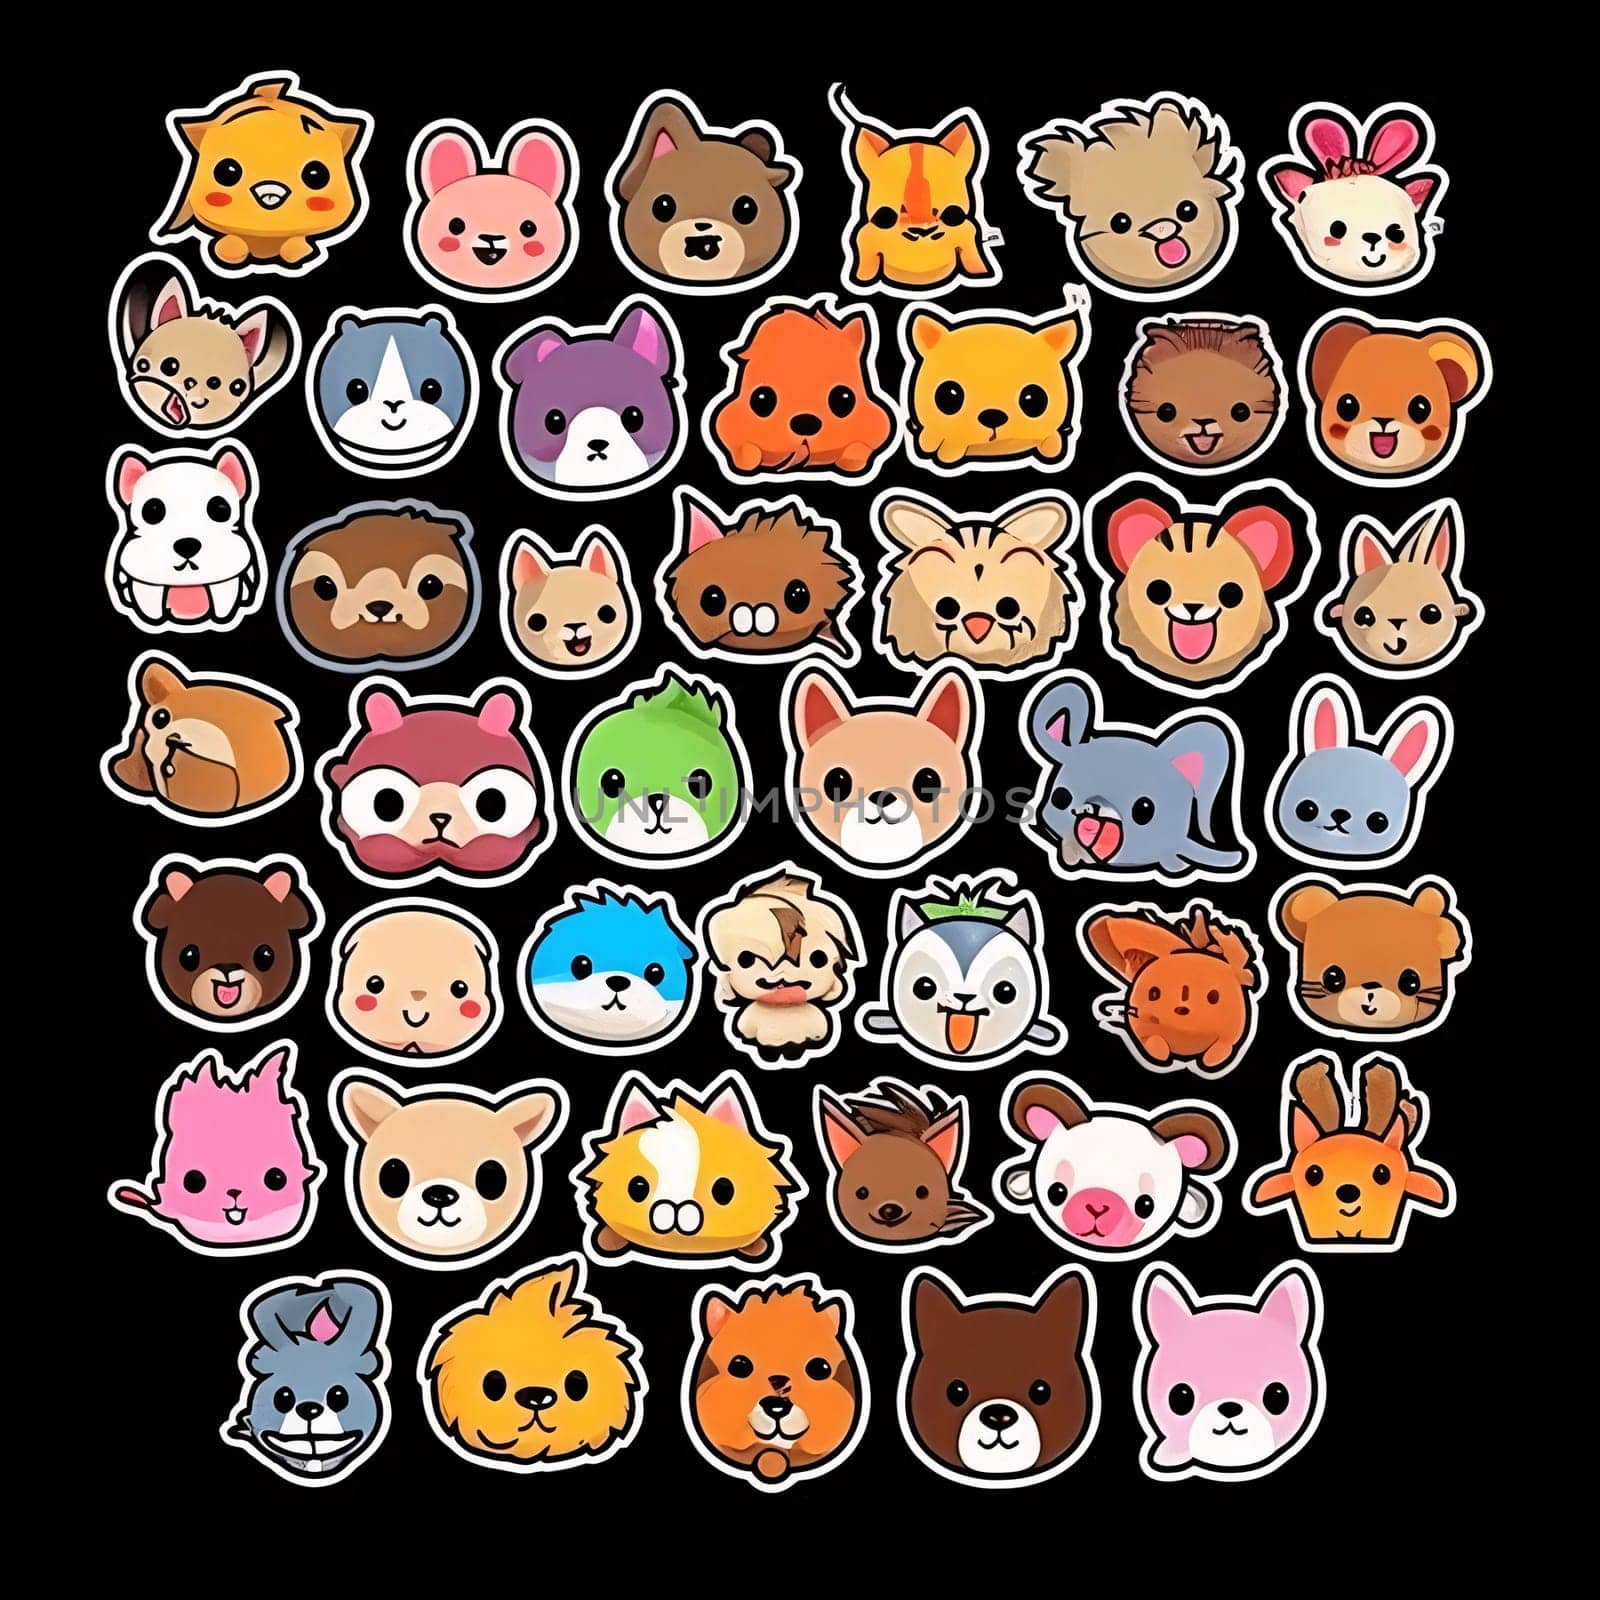 New icons collection: Set of cute cartoon animal faces. Vector illustration on black background.